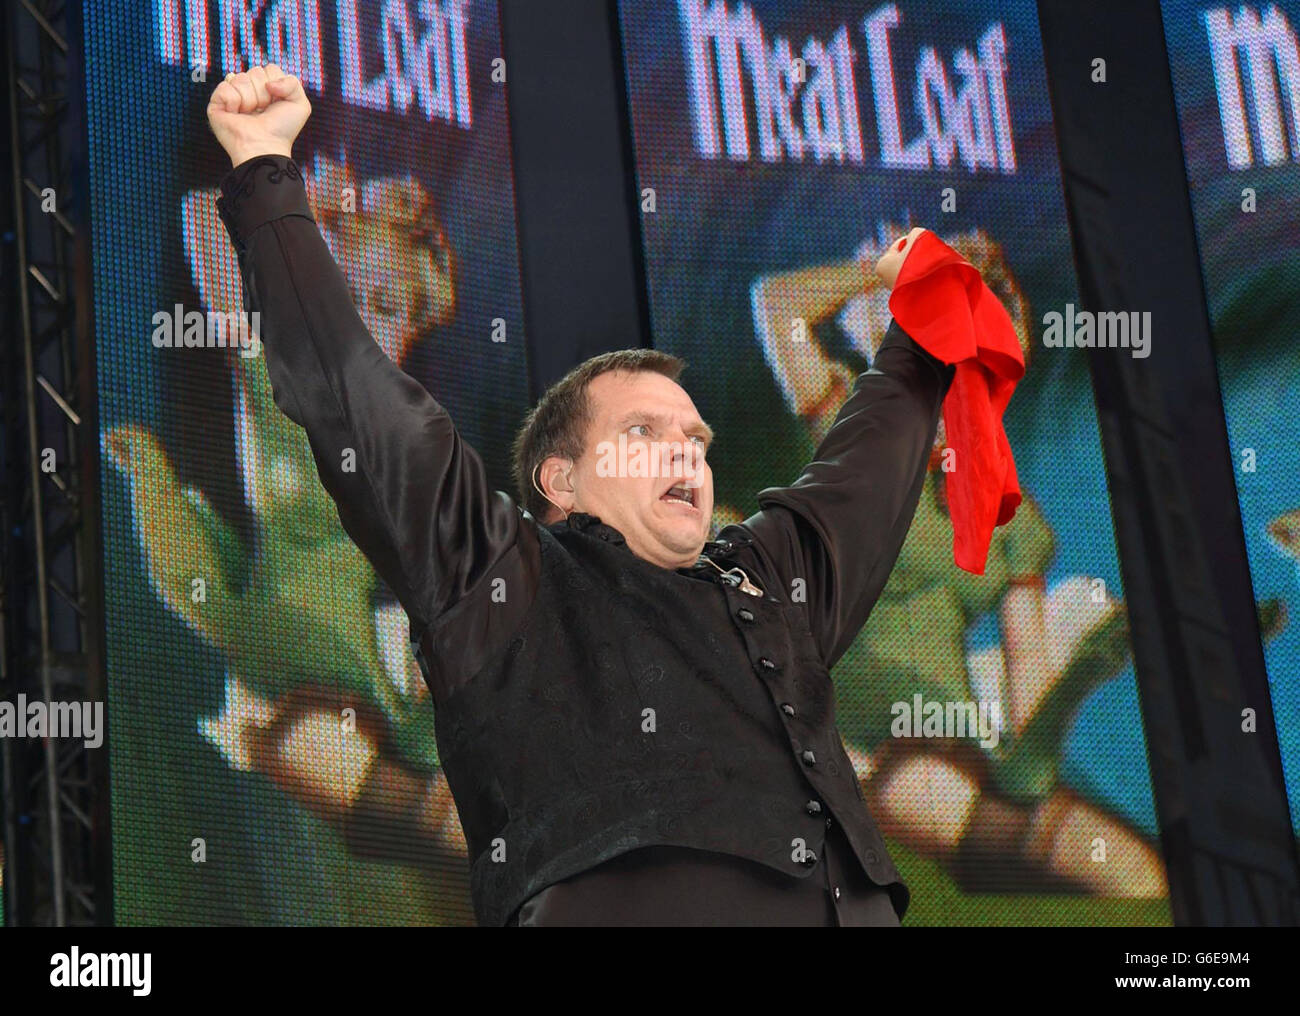 Meat Loaf performing on stage at the Capital Radio Party in the Park, in Hyde Park, London. The concert is being held in aid of The Prince's Trust. Stock Photo